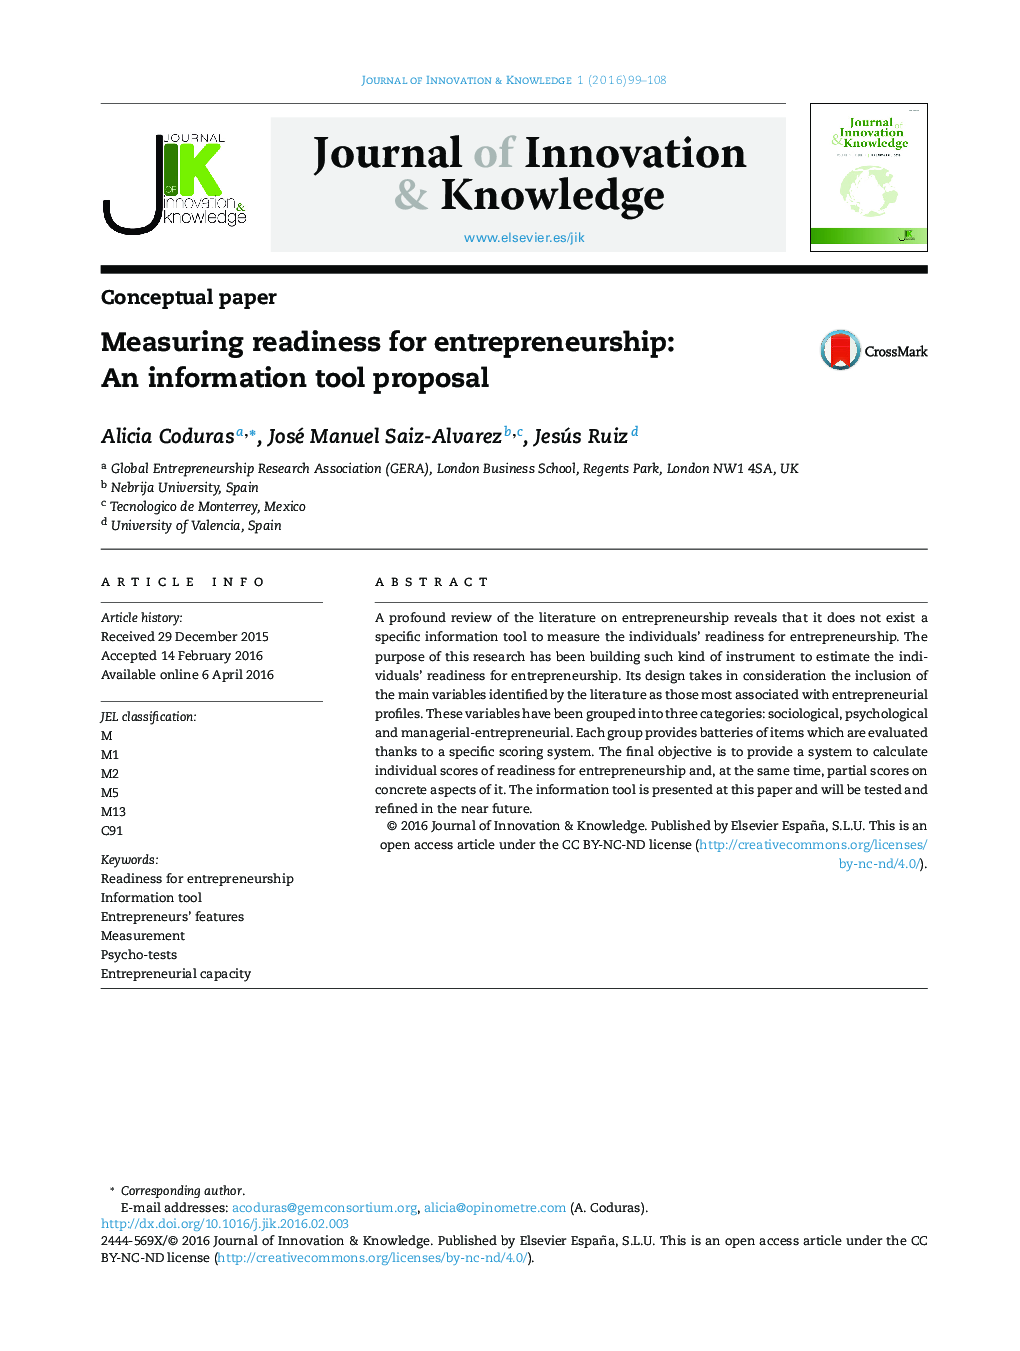 Measuring readiness for entrepreneurship: An information tool proposal